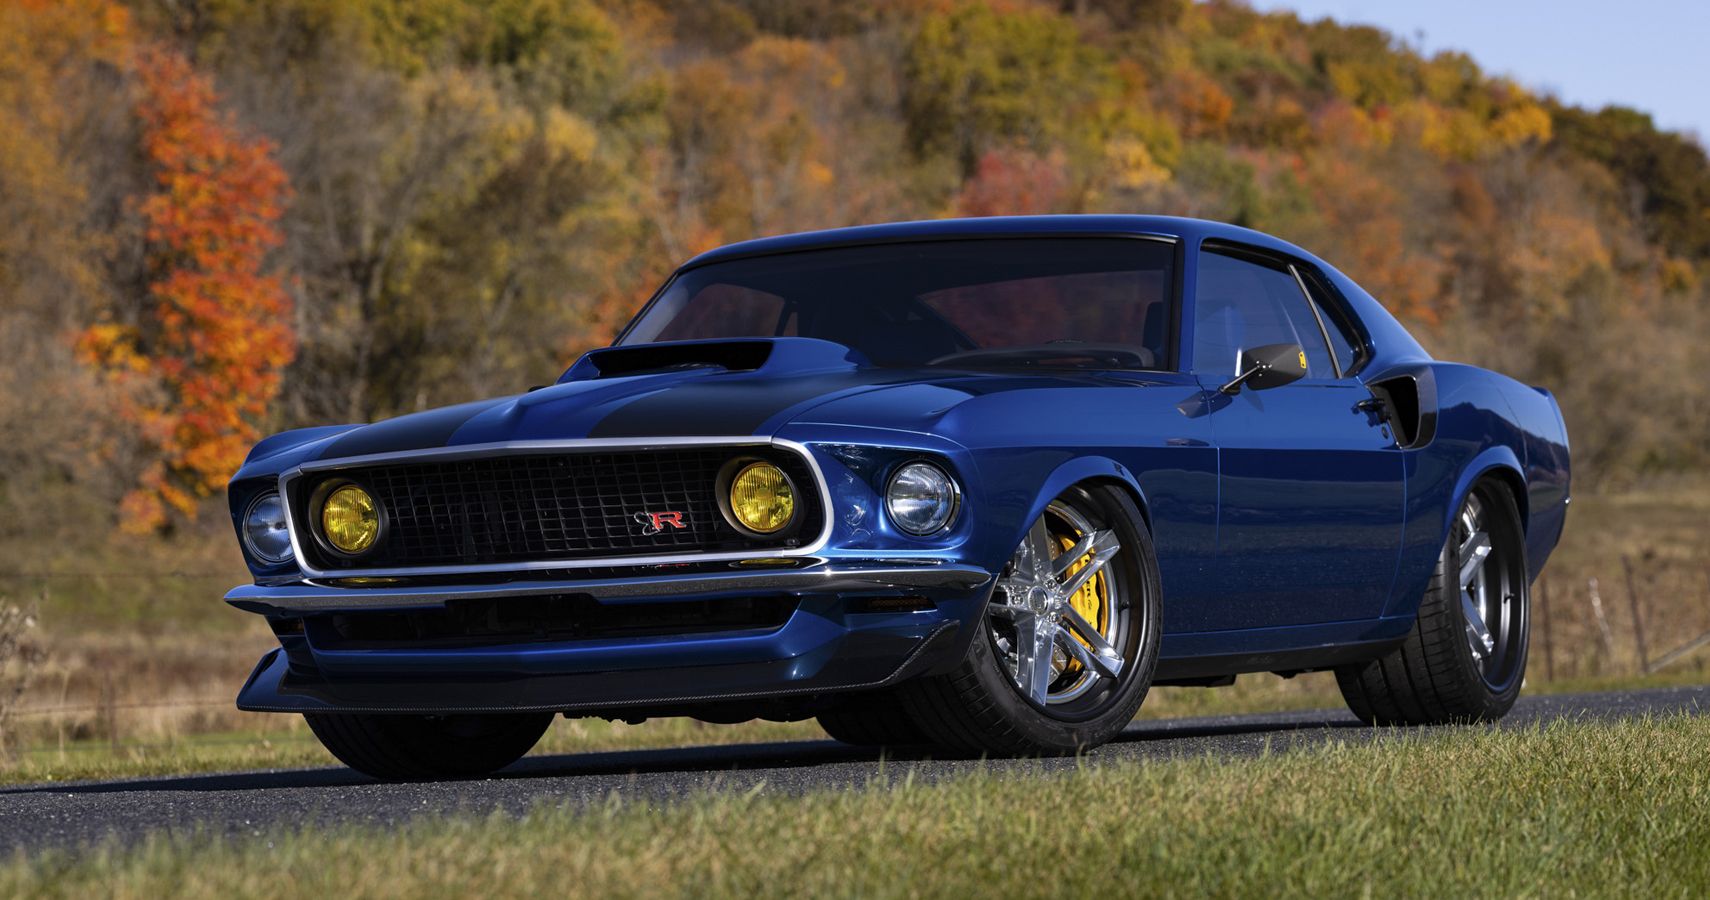 Ringbrothers Debuts Patriarc Based On 1969 Ford Mustang Mach 1